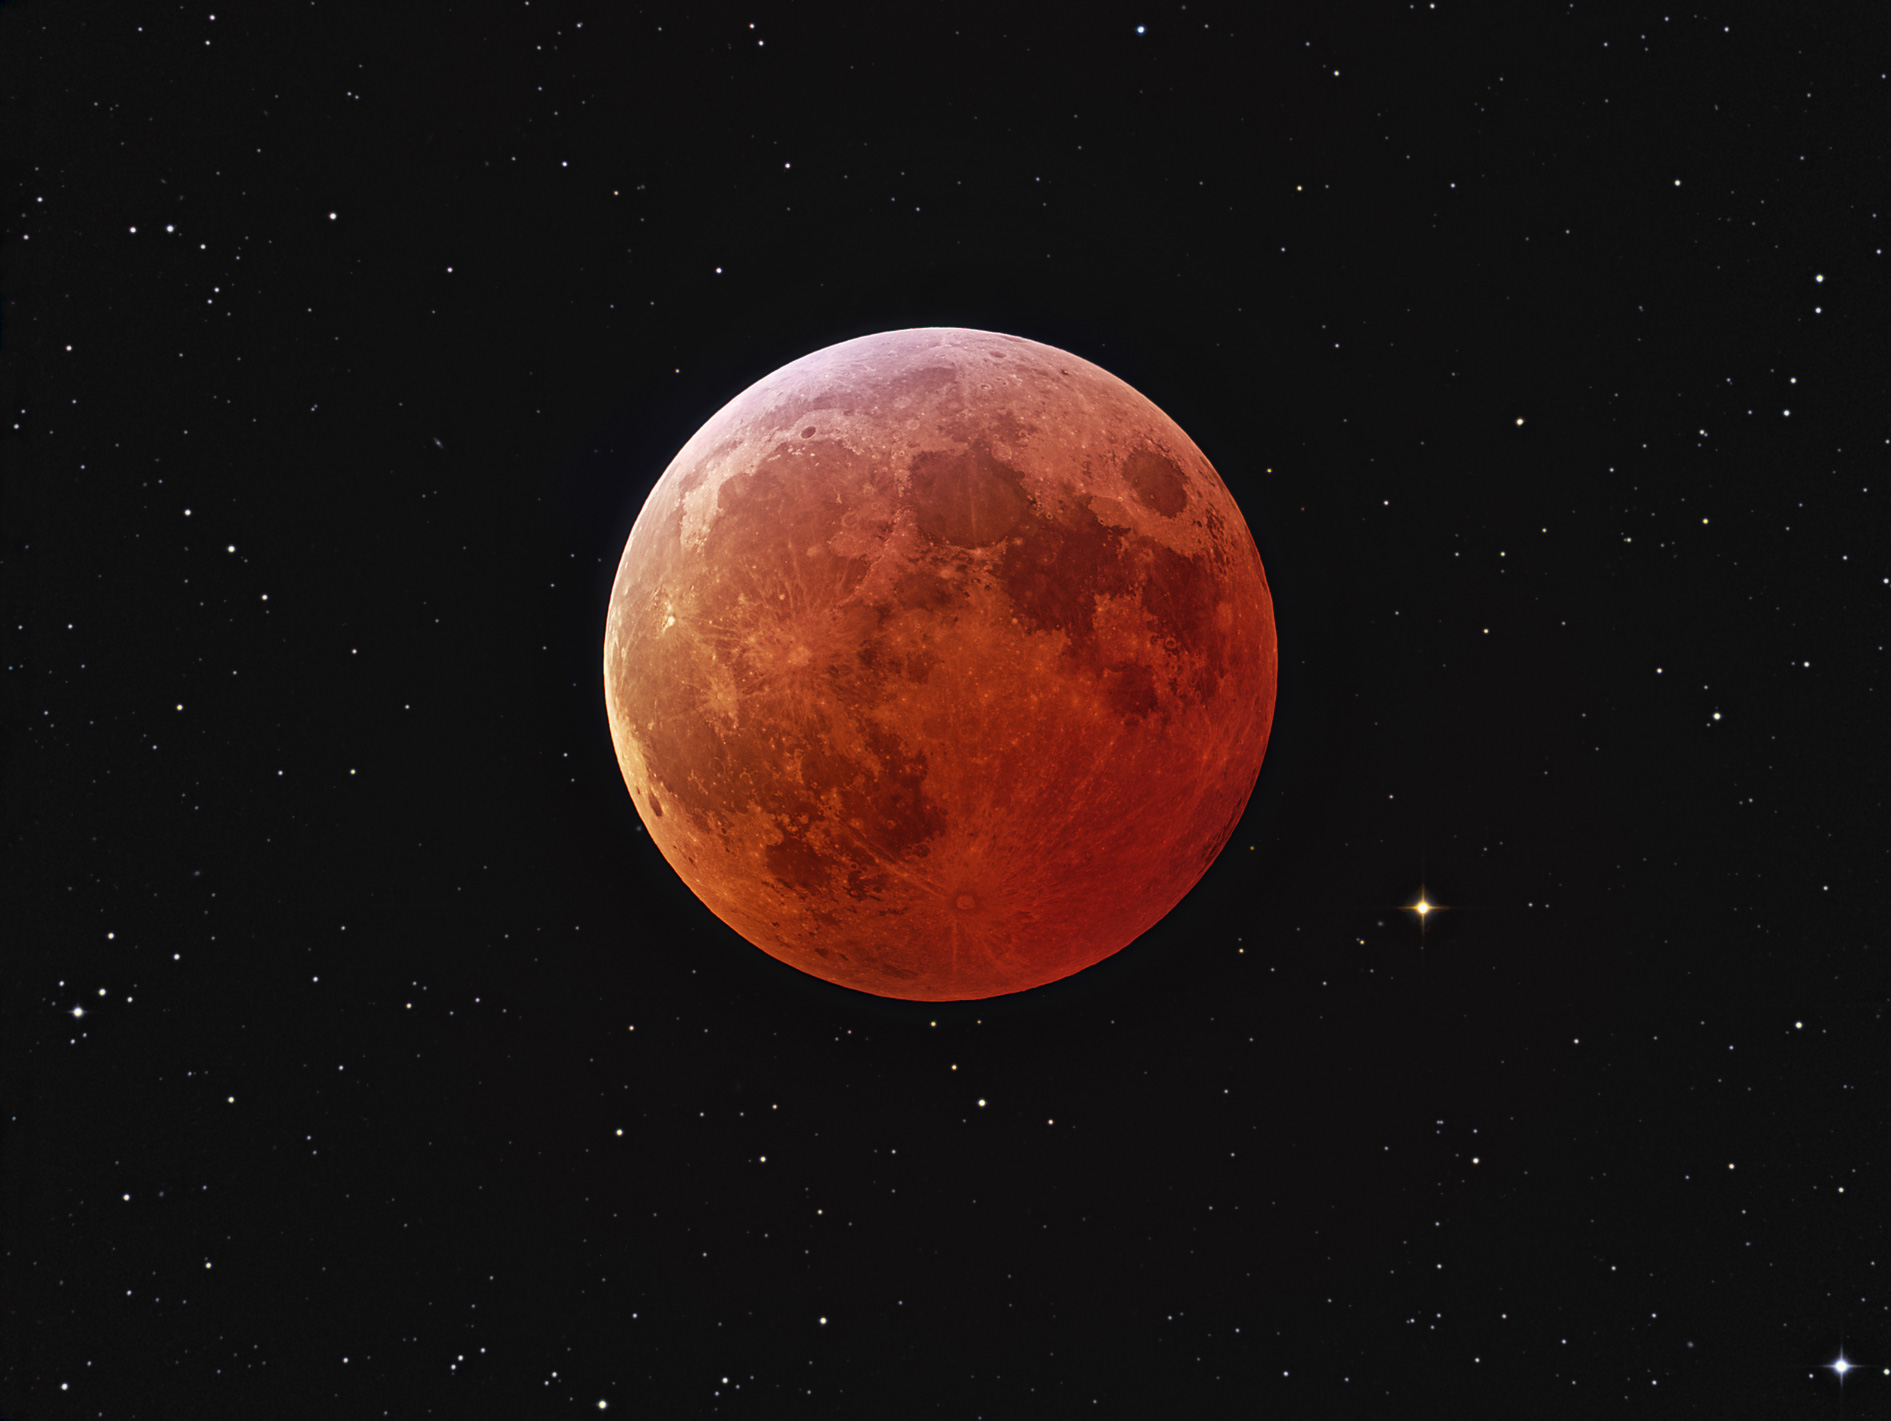 Eclipsed Moon and Stars